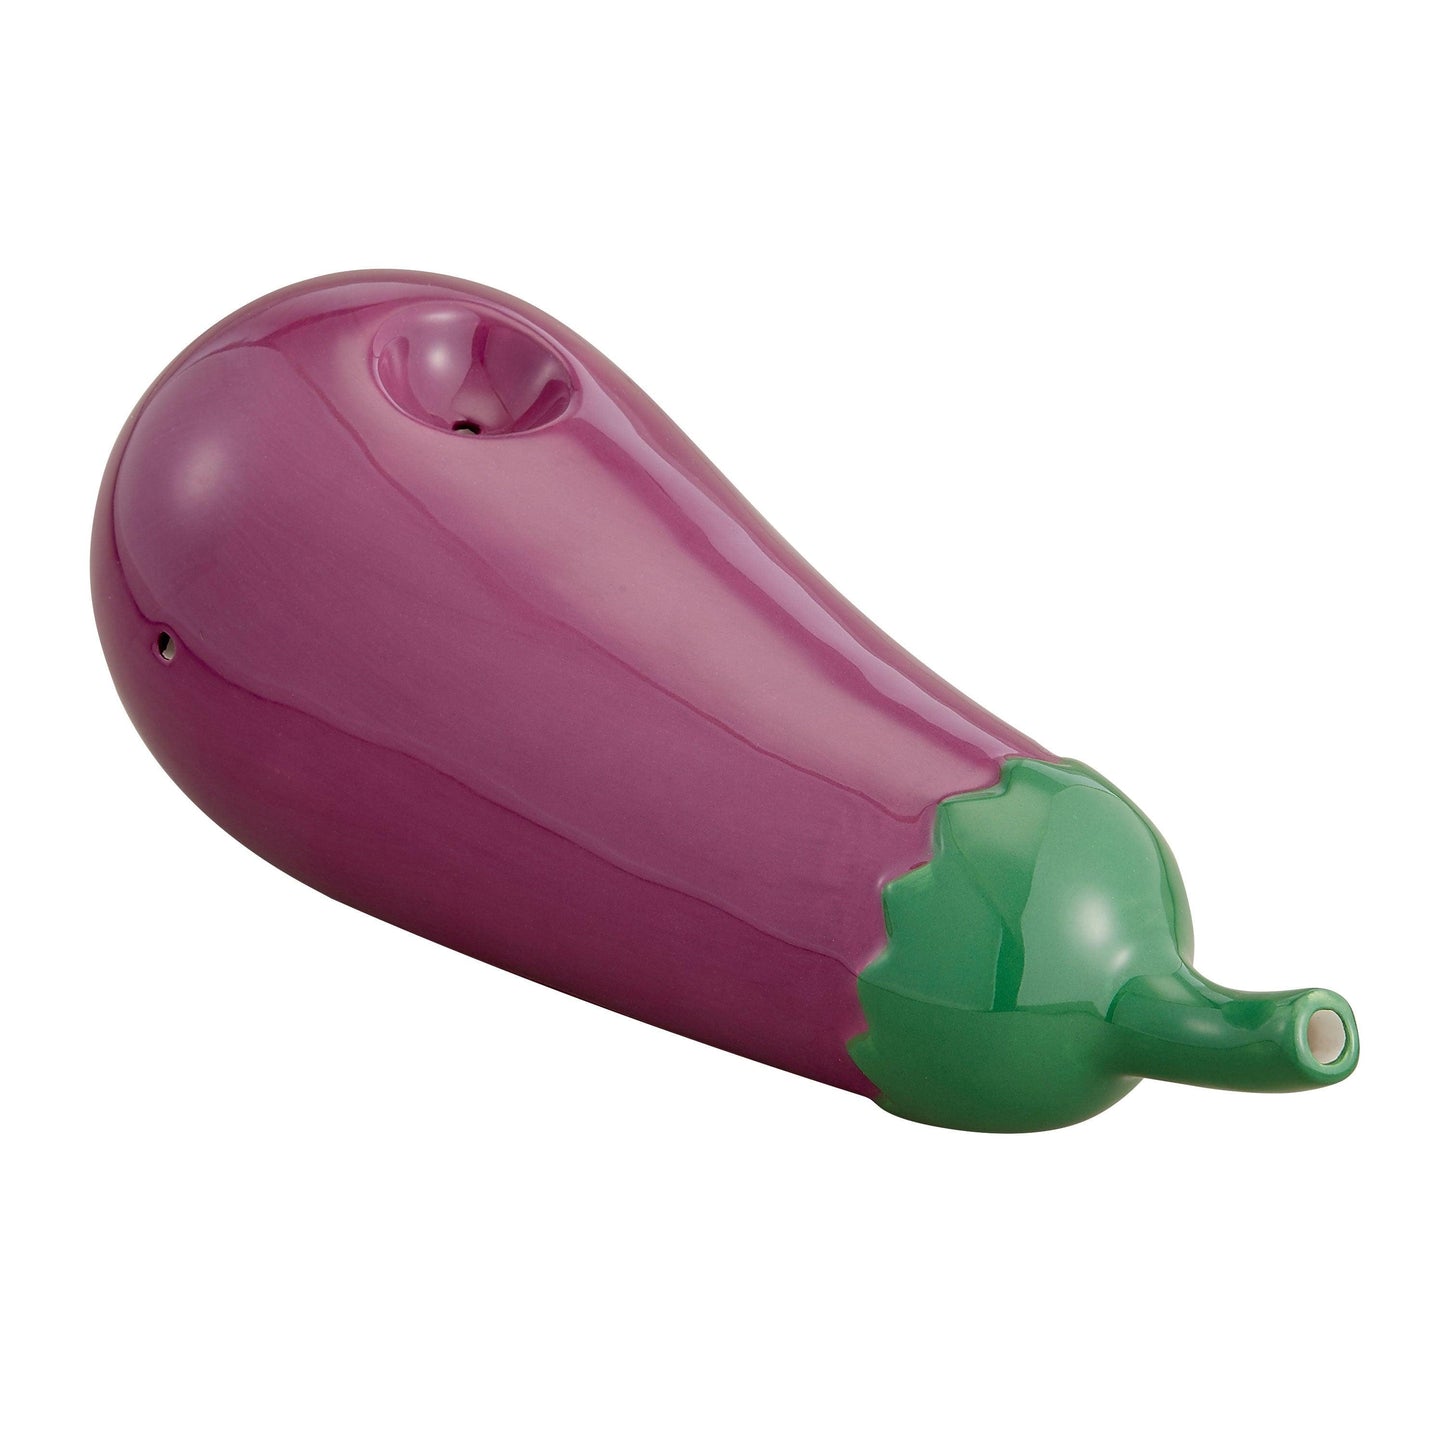 Egg Plant Shaped Pipe - My Sex Toy Hub